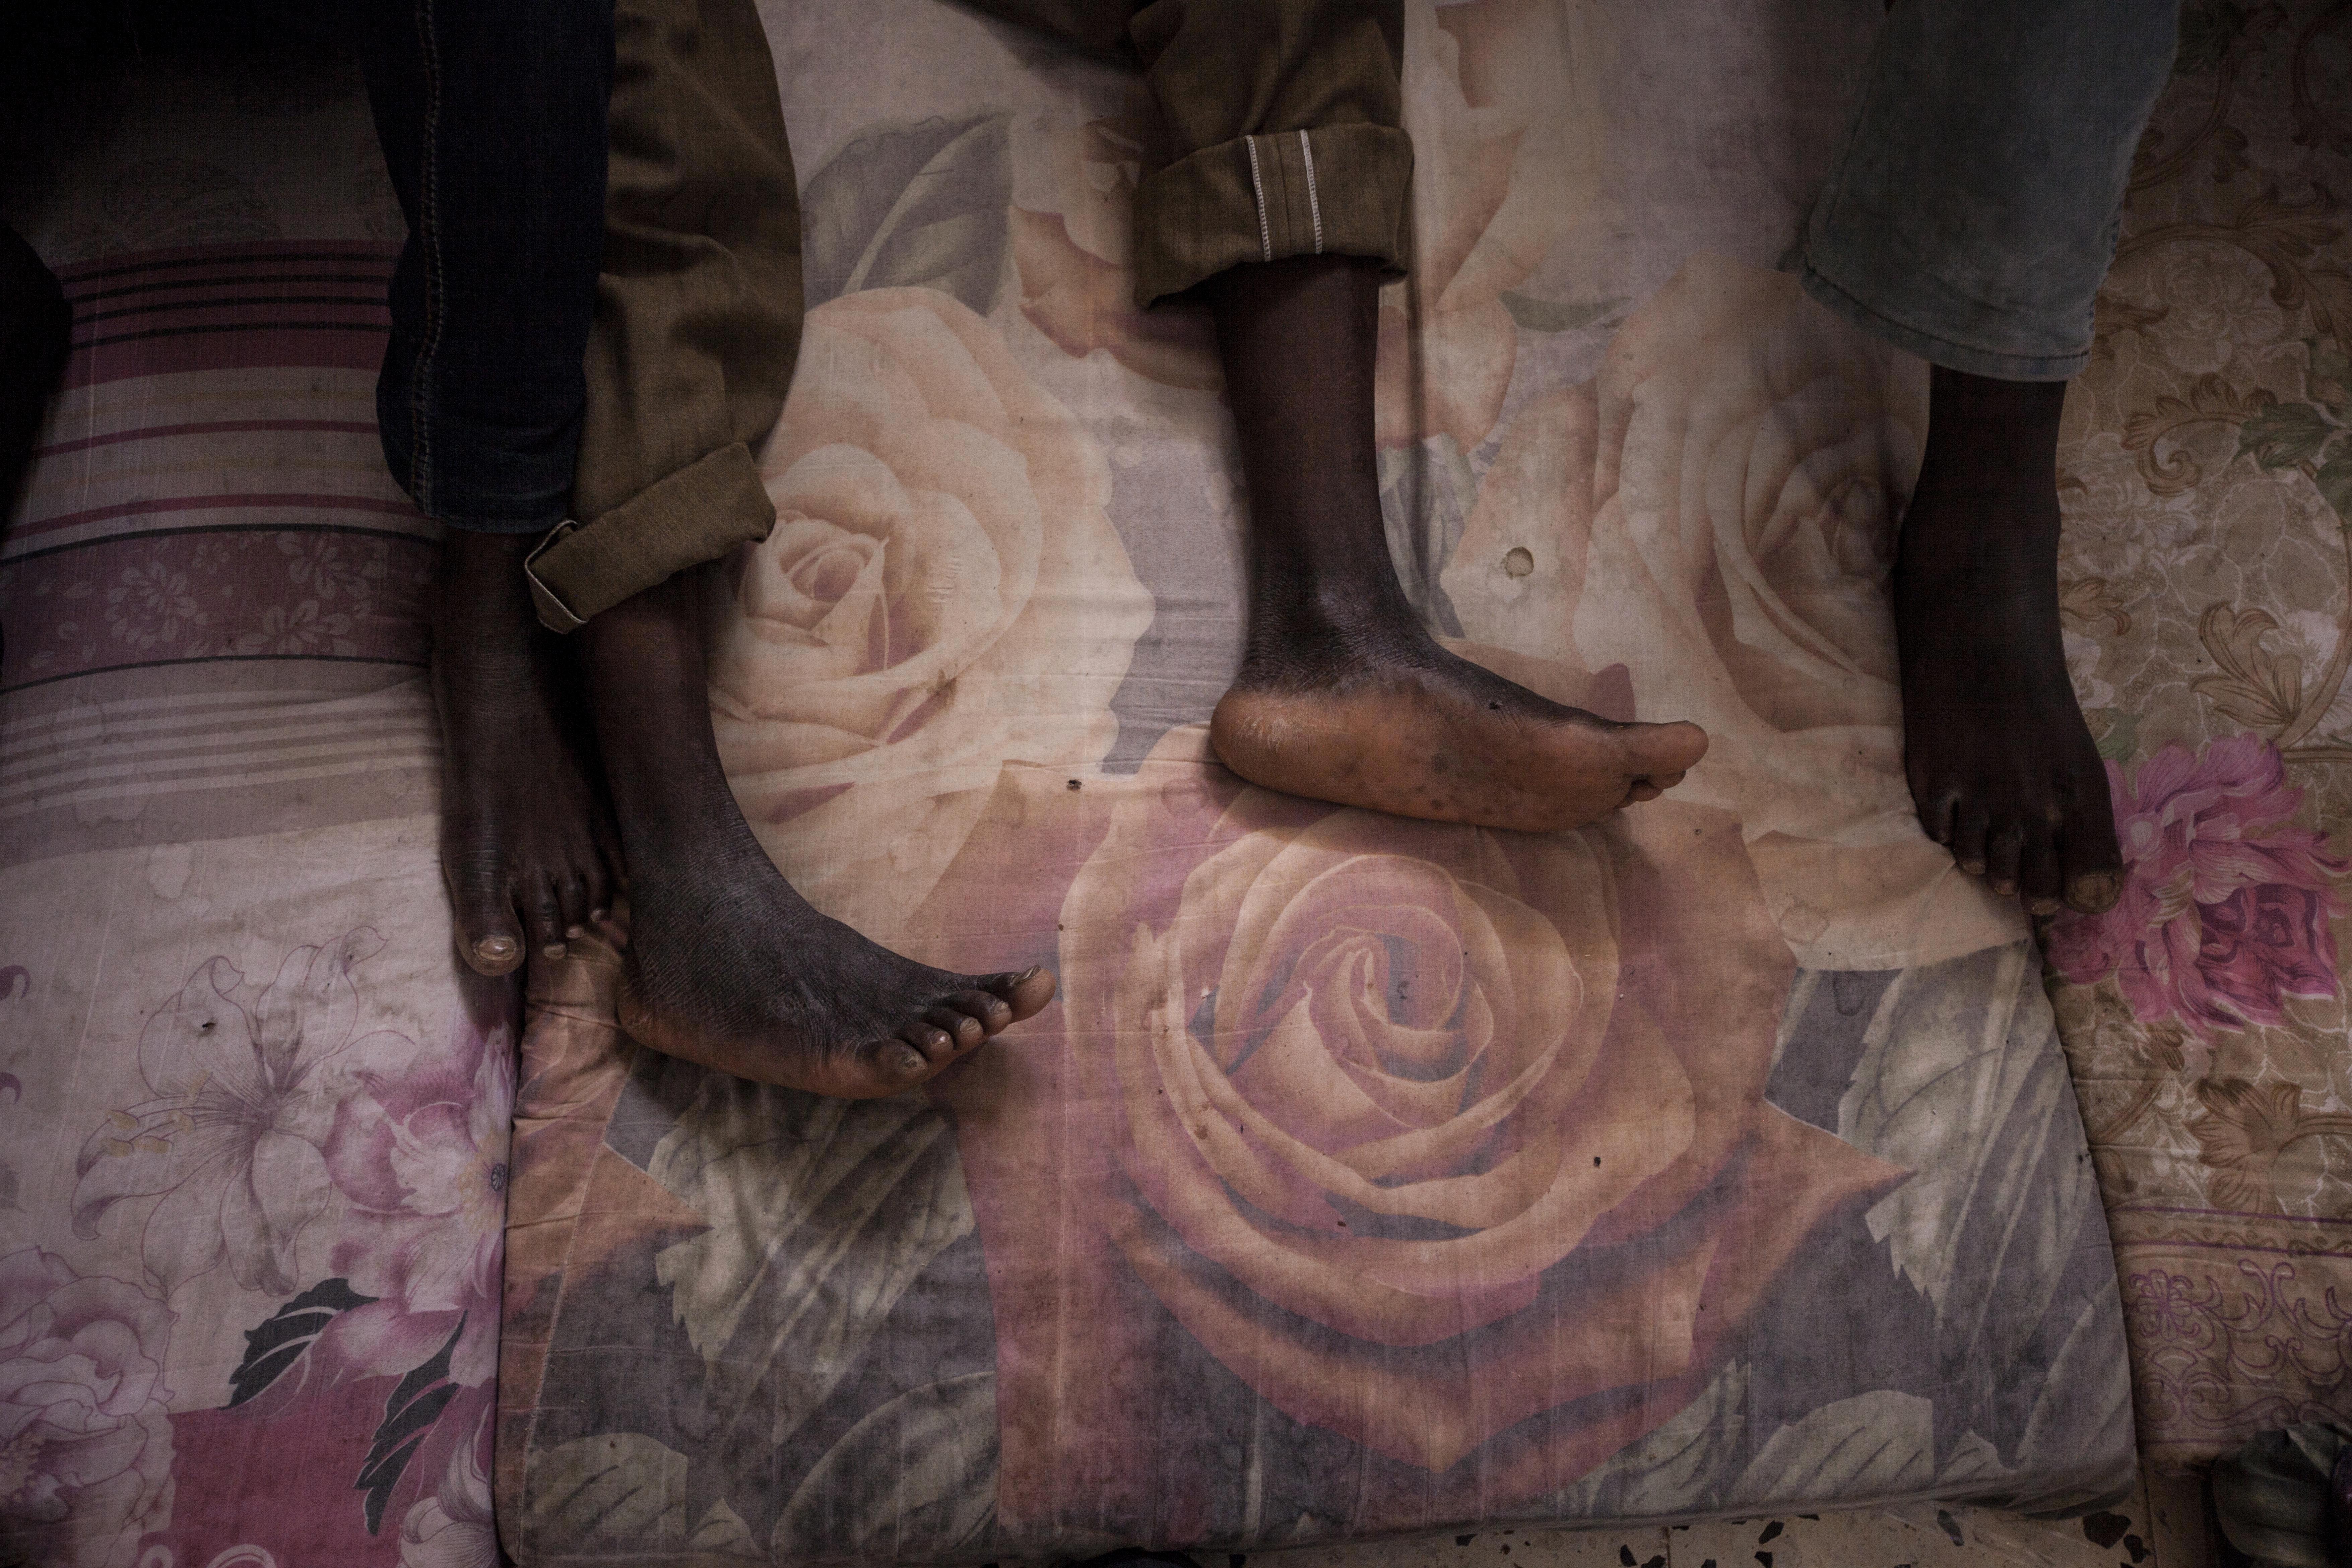 Migrants rest on mattresses in the male section of a detention center in Surman, Libya.